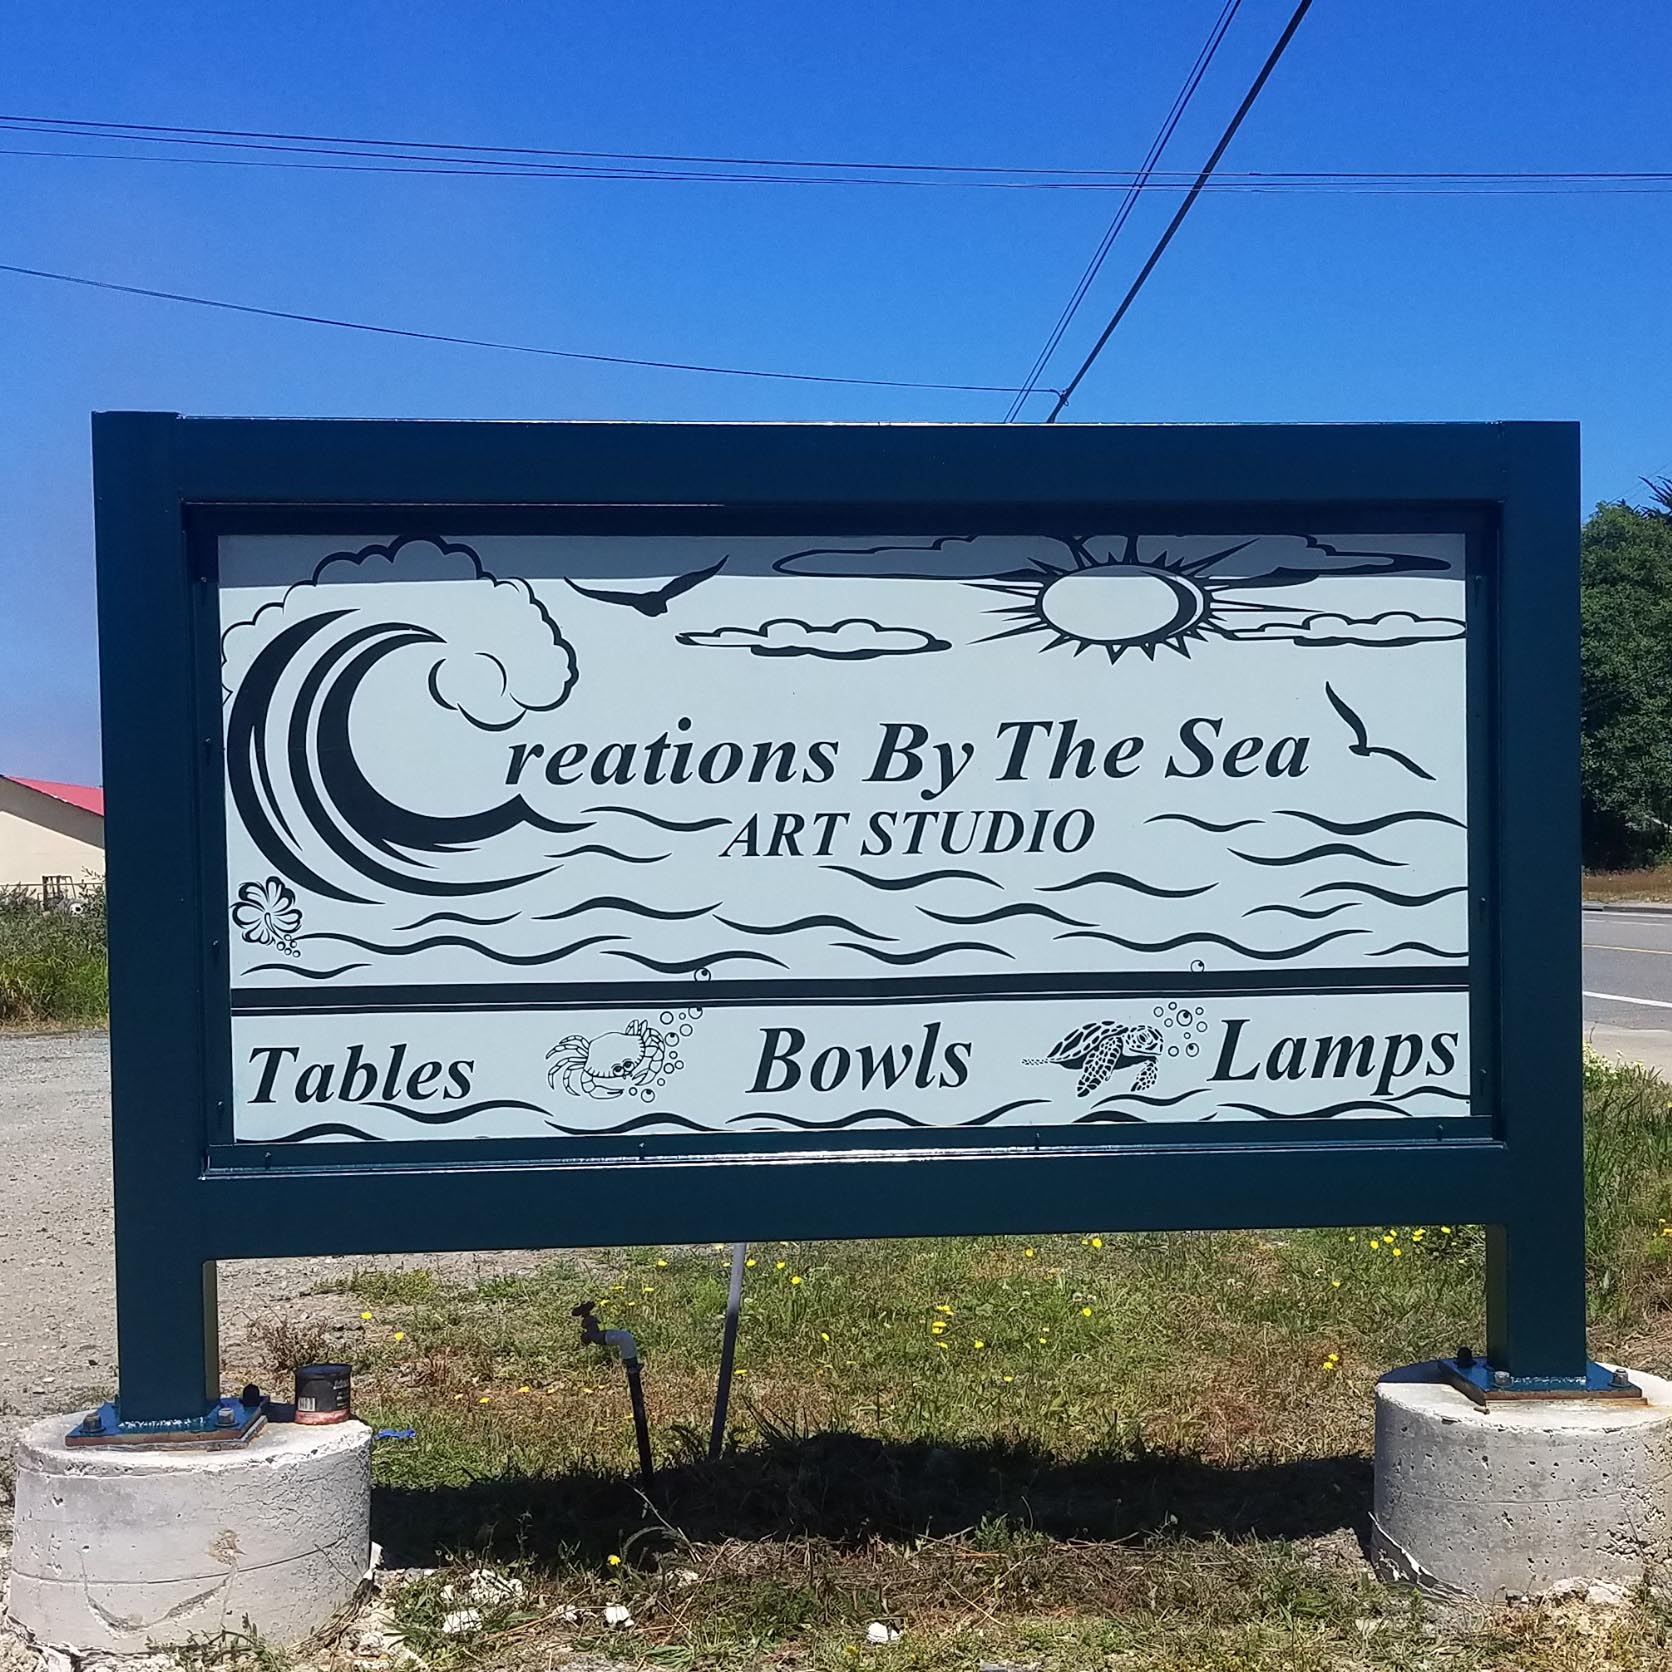 outdoor sign with text for Creations By The Sea Art Studio